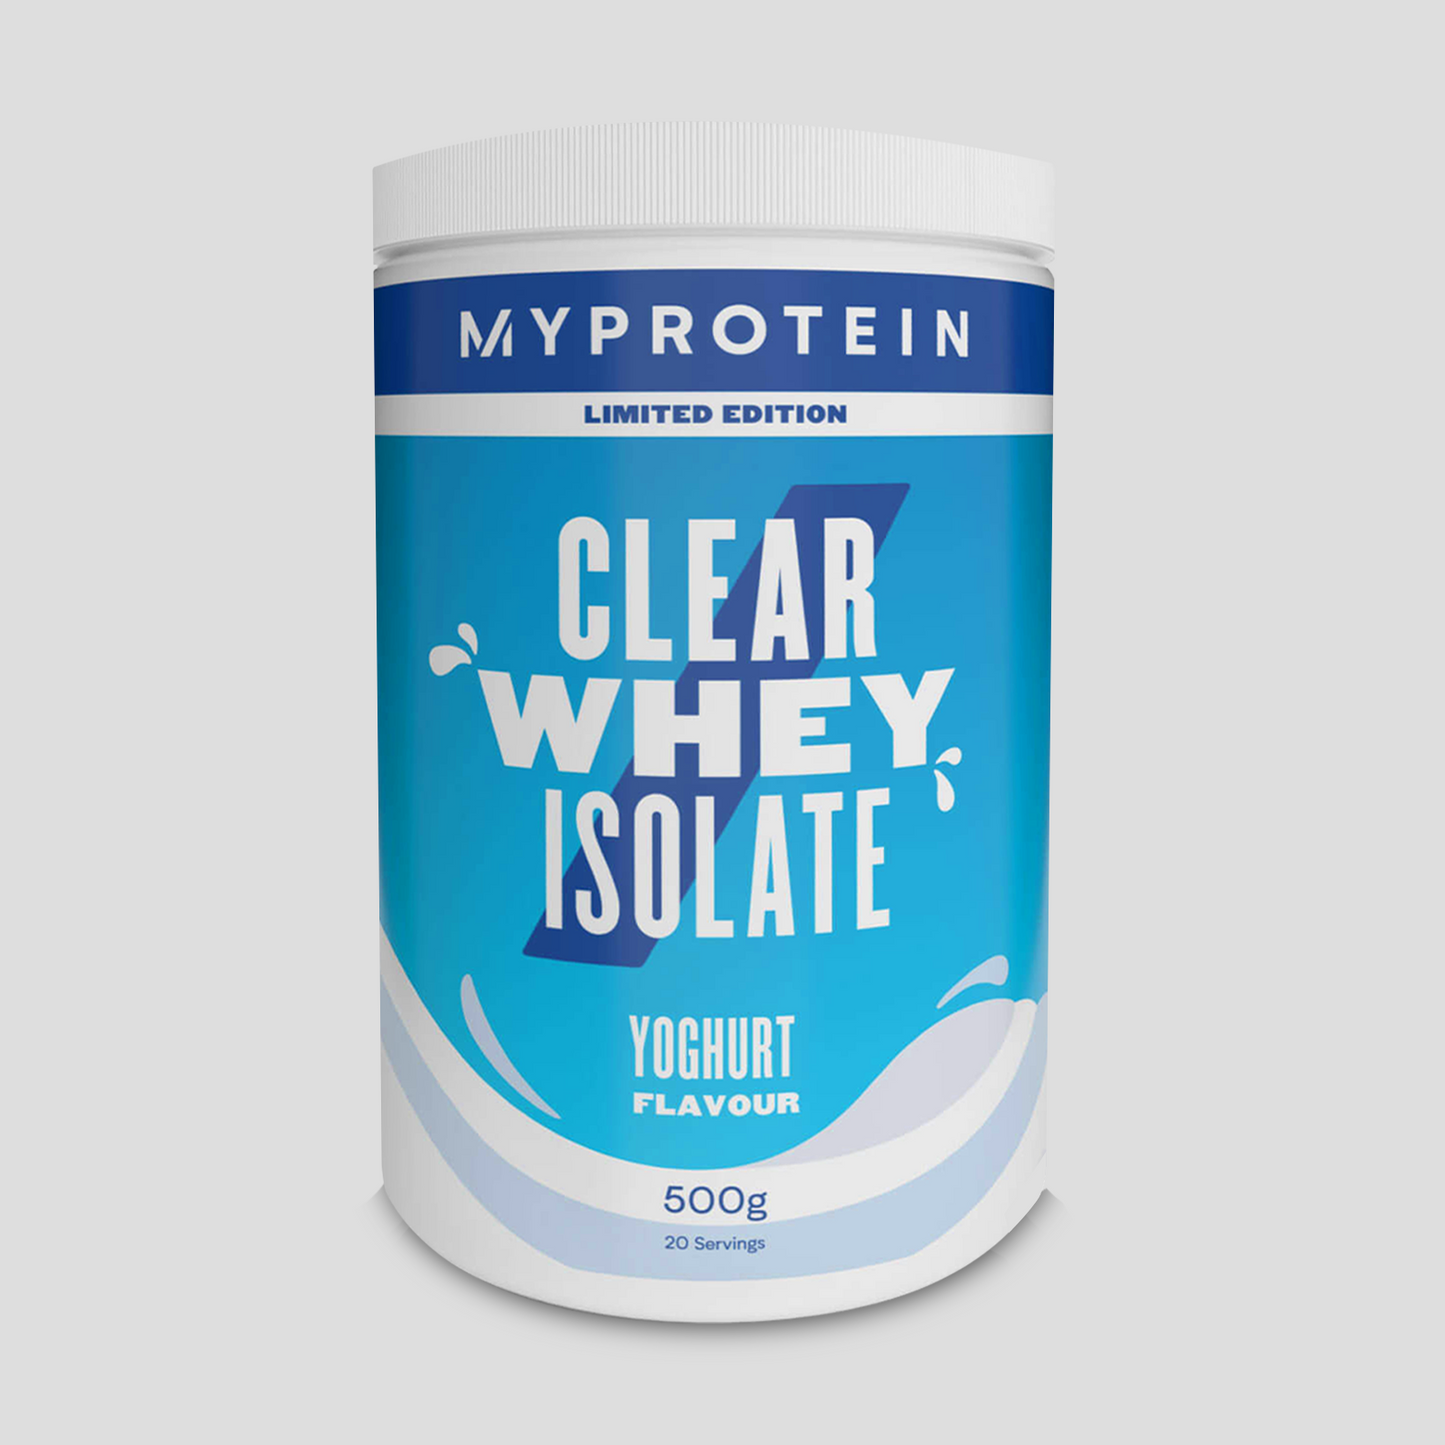 Clear Whey Isolate - Yoghurt, Limited Edition